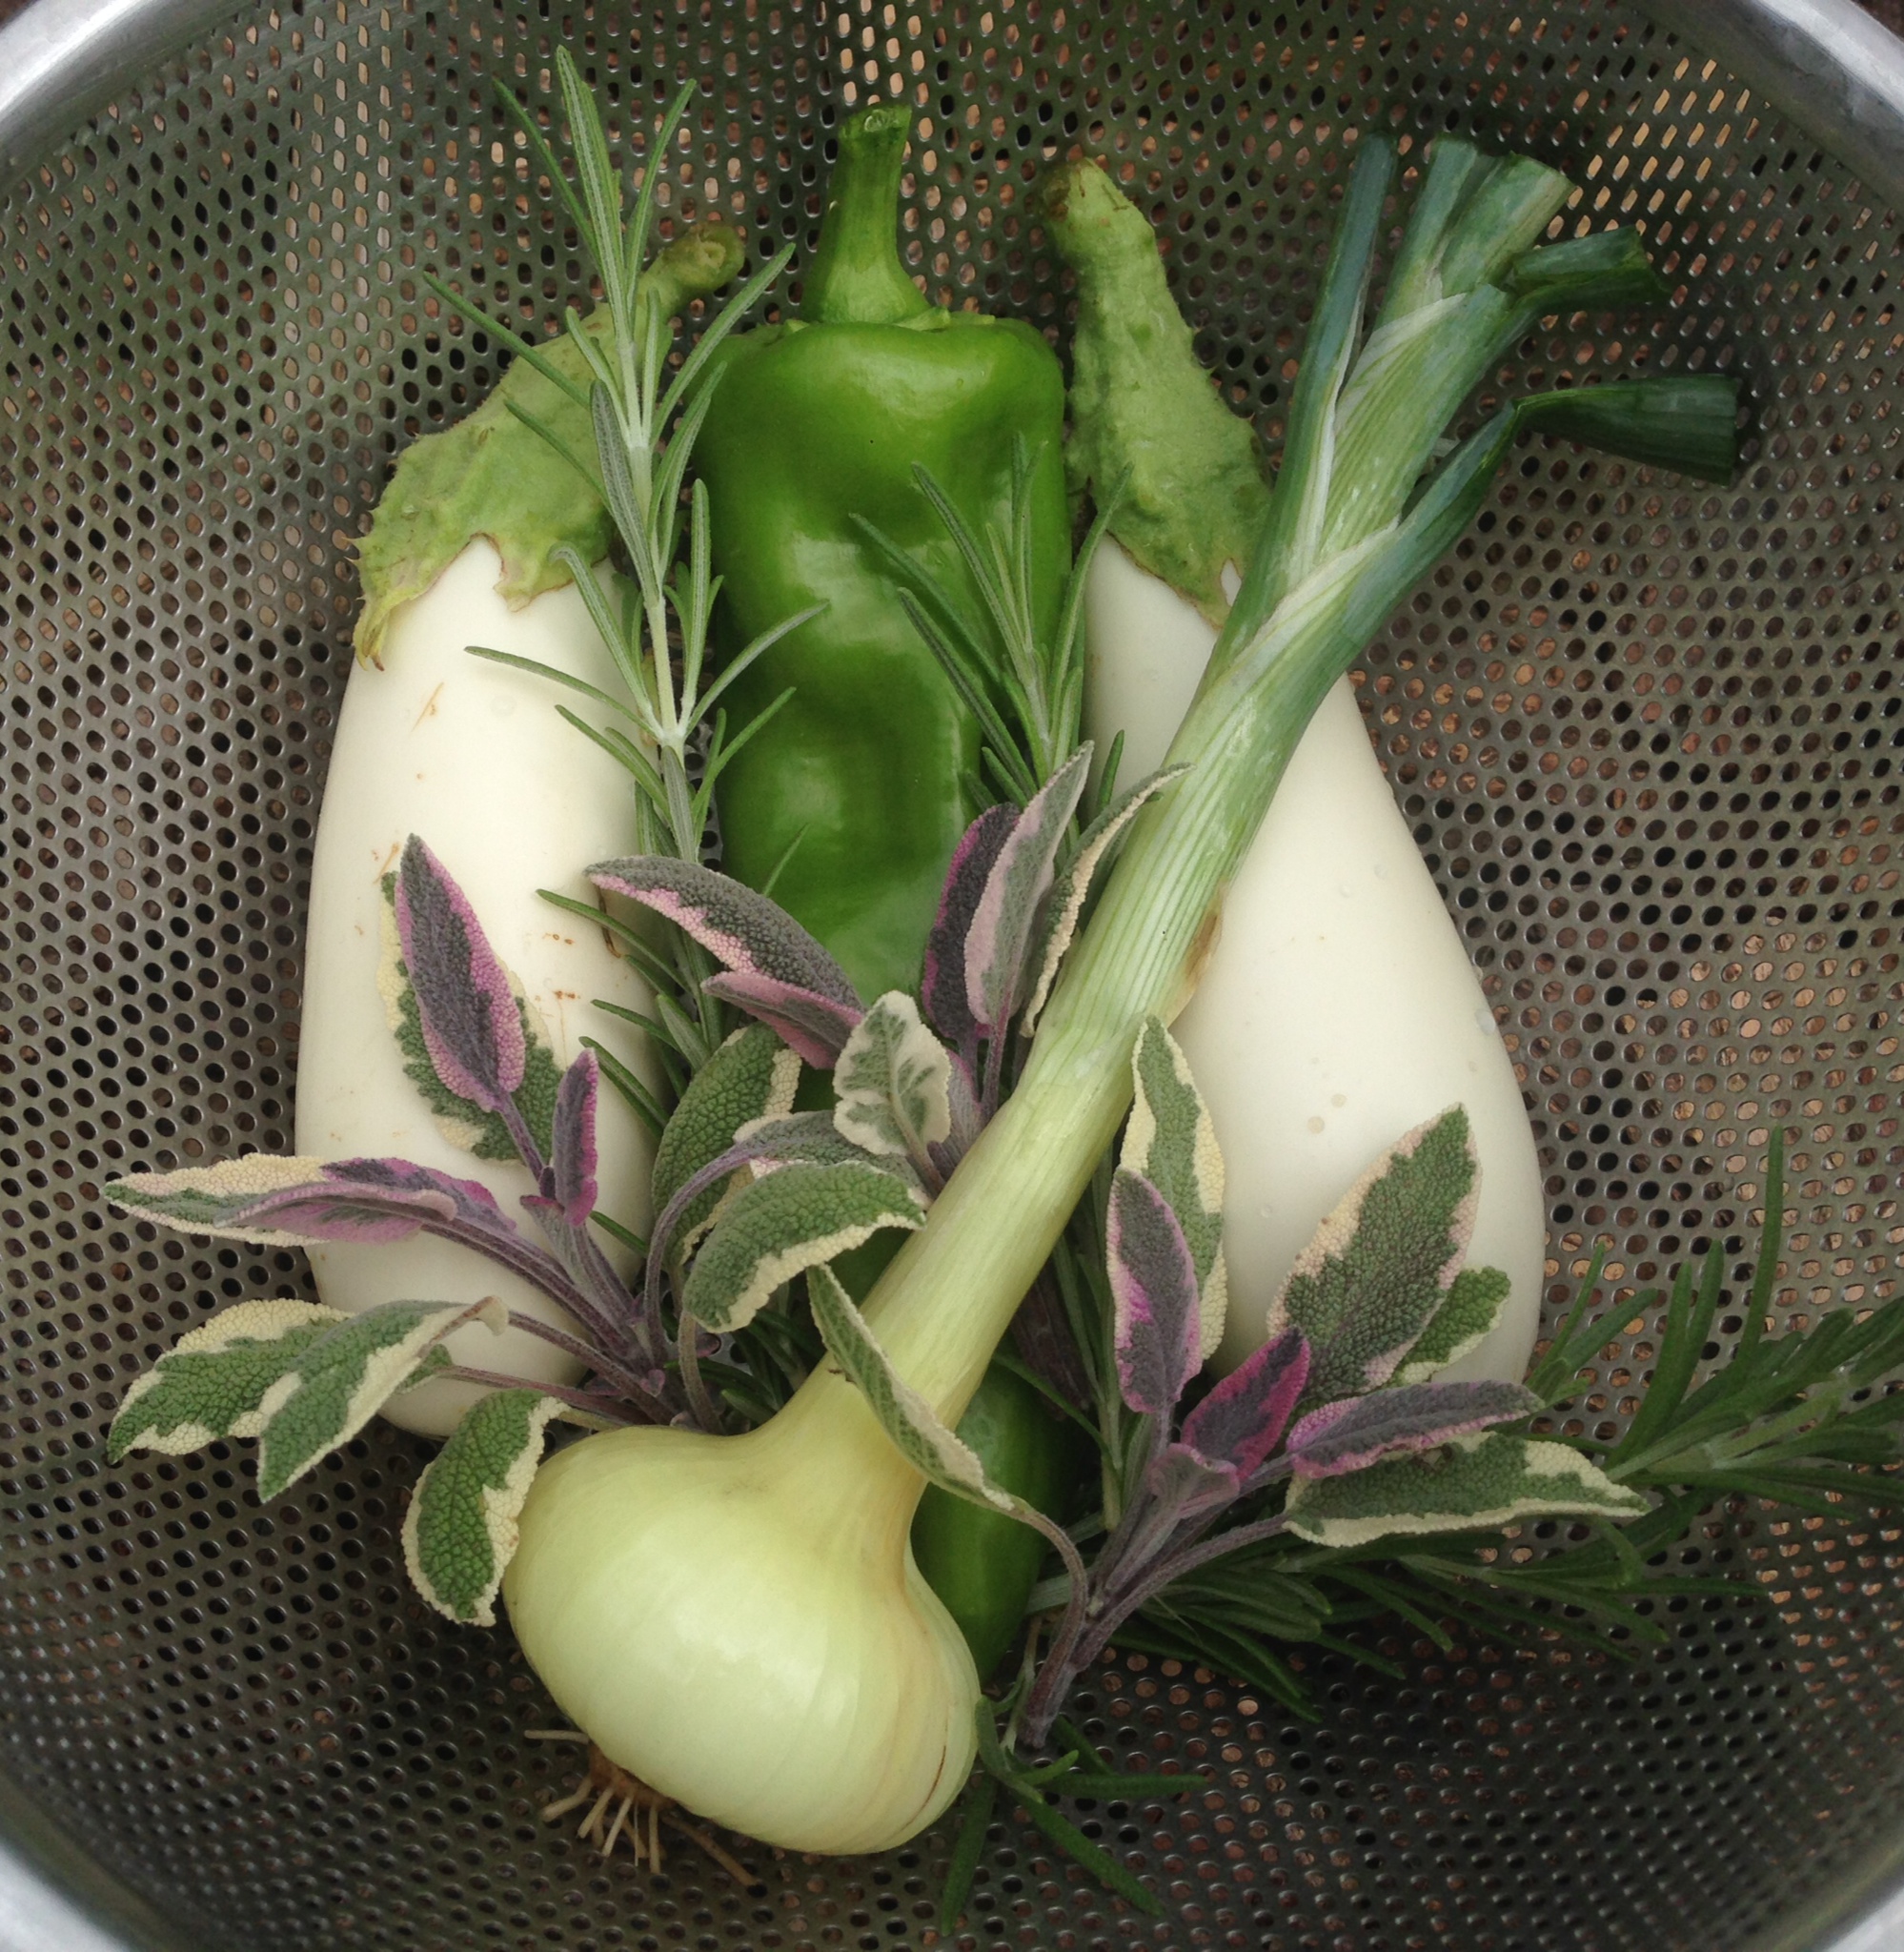 Seasonal summer garden cooking classes offered by Wasatch Community Gardens